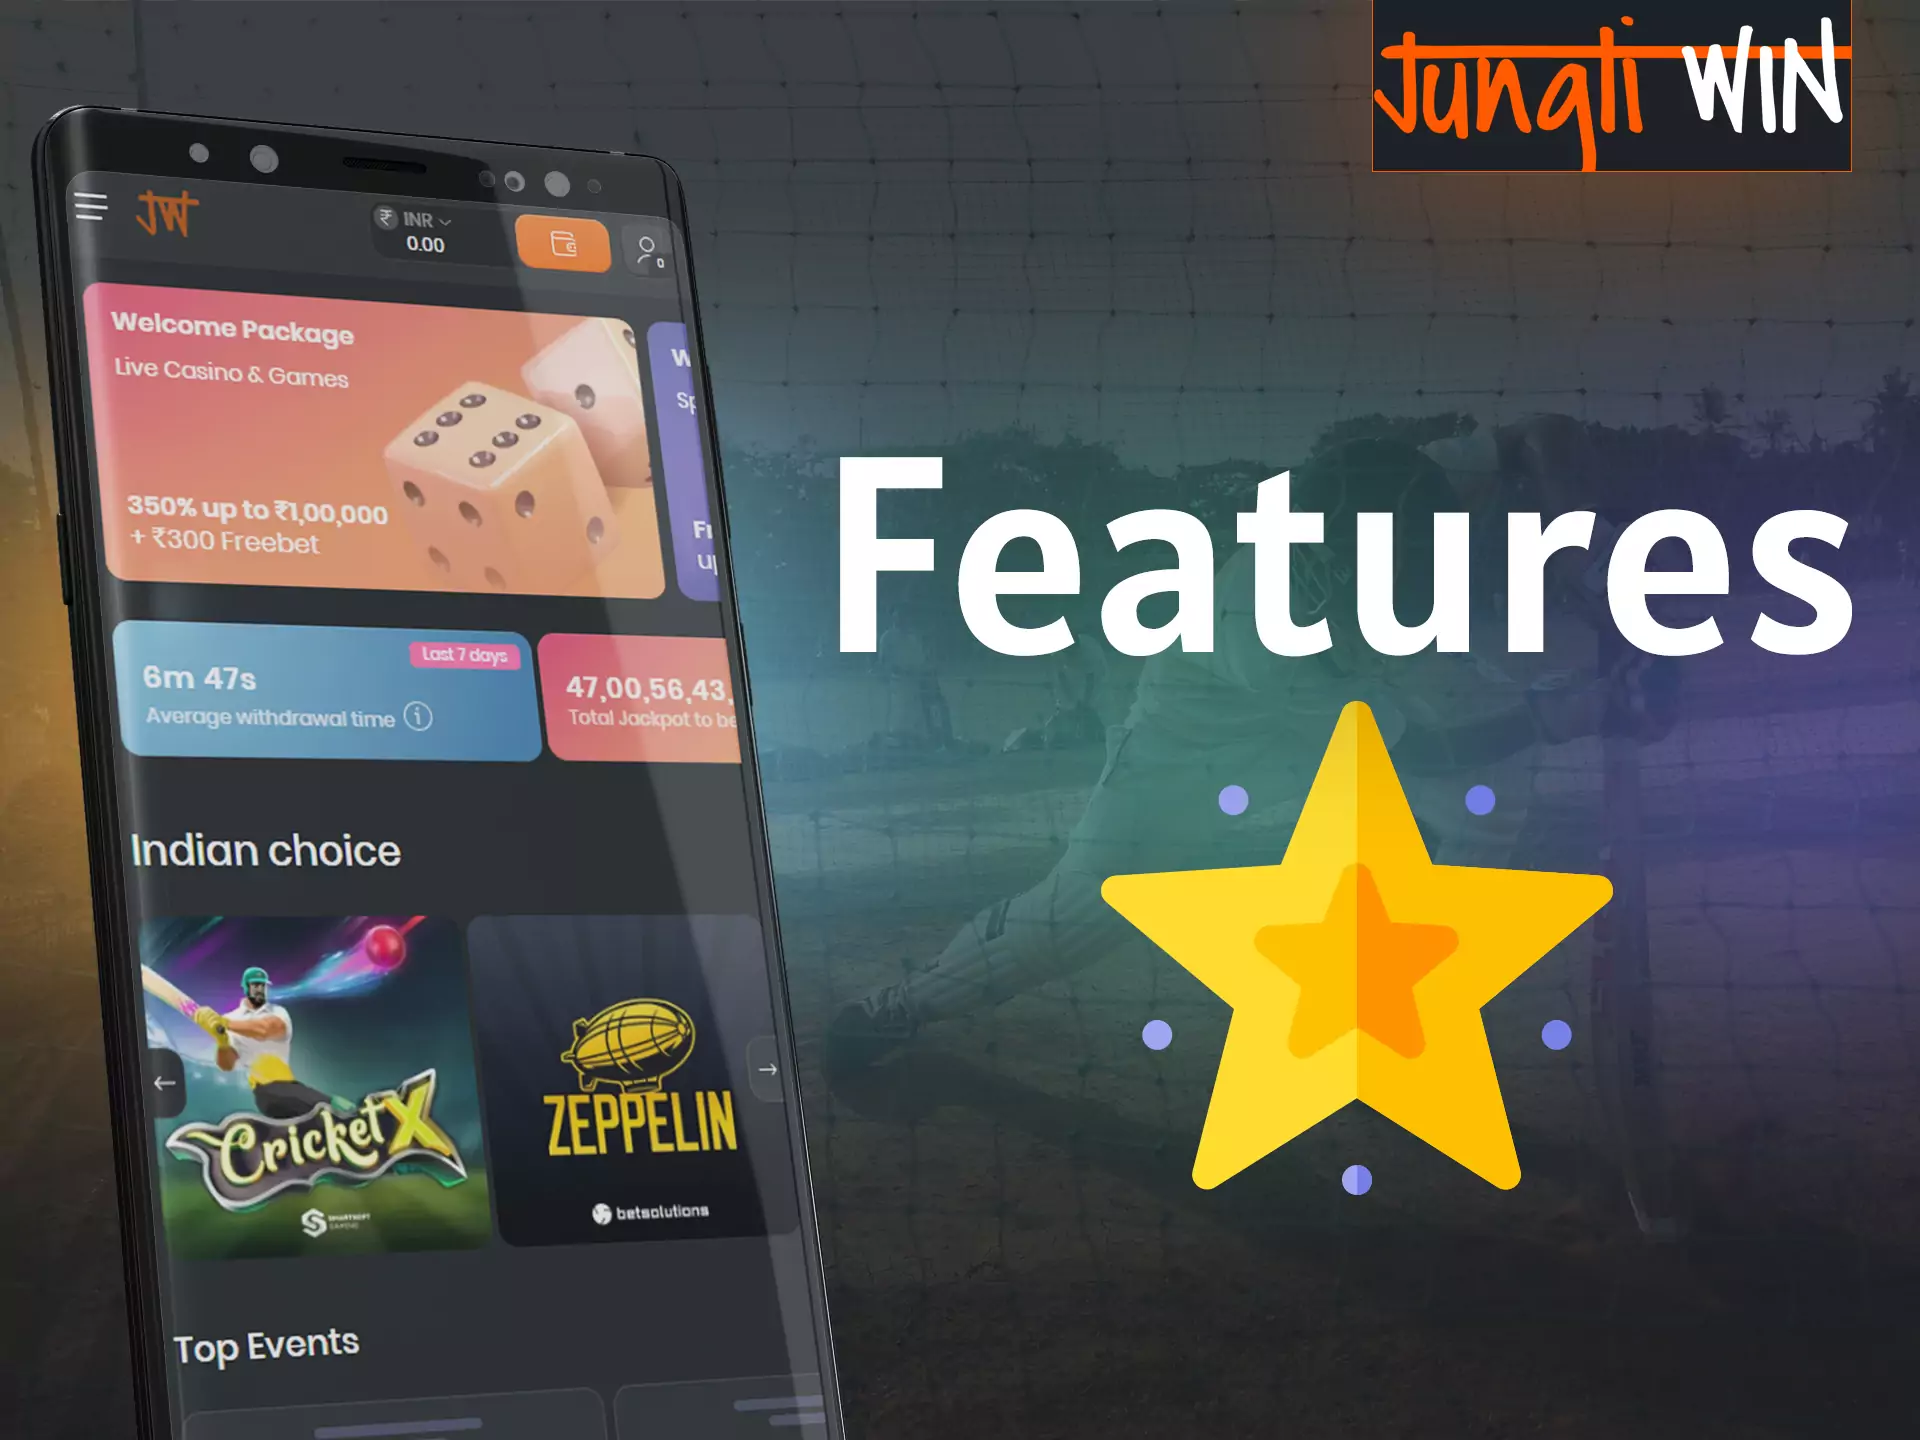 The Jungliwin app has many user-friendly features for players and an intuitive interface.